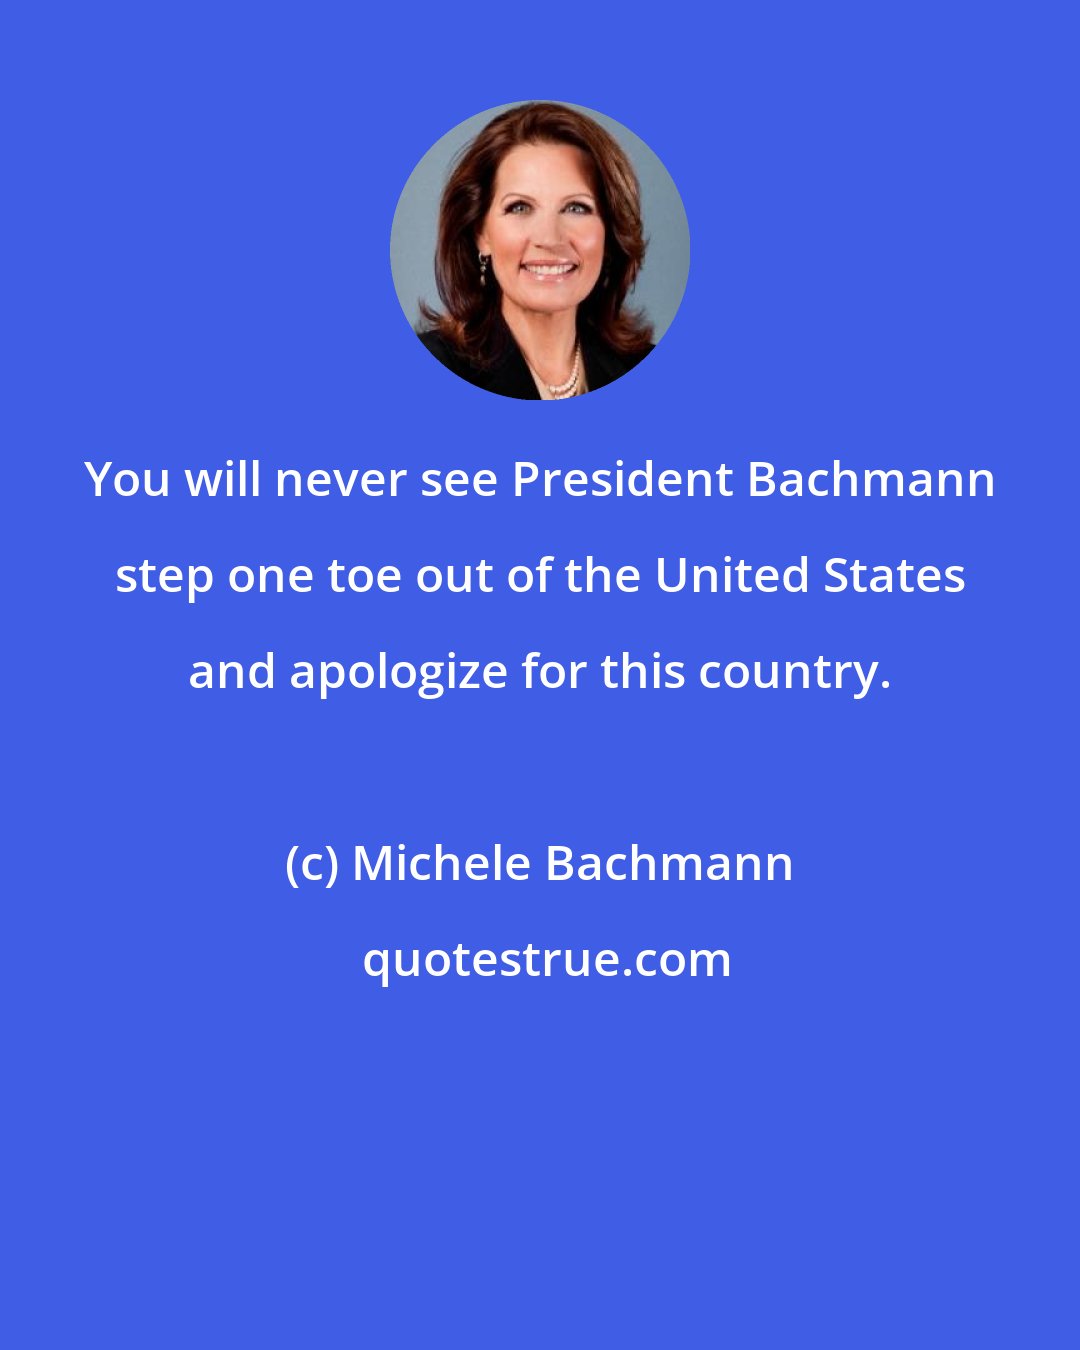 Michele Bachmann: You will never see President Bachmann step one toe out of the United States and apologize for this country.